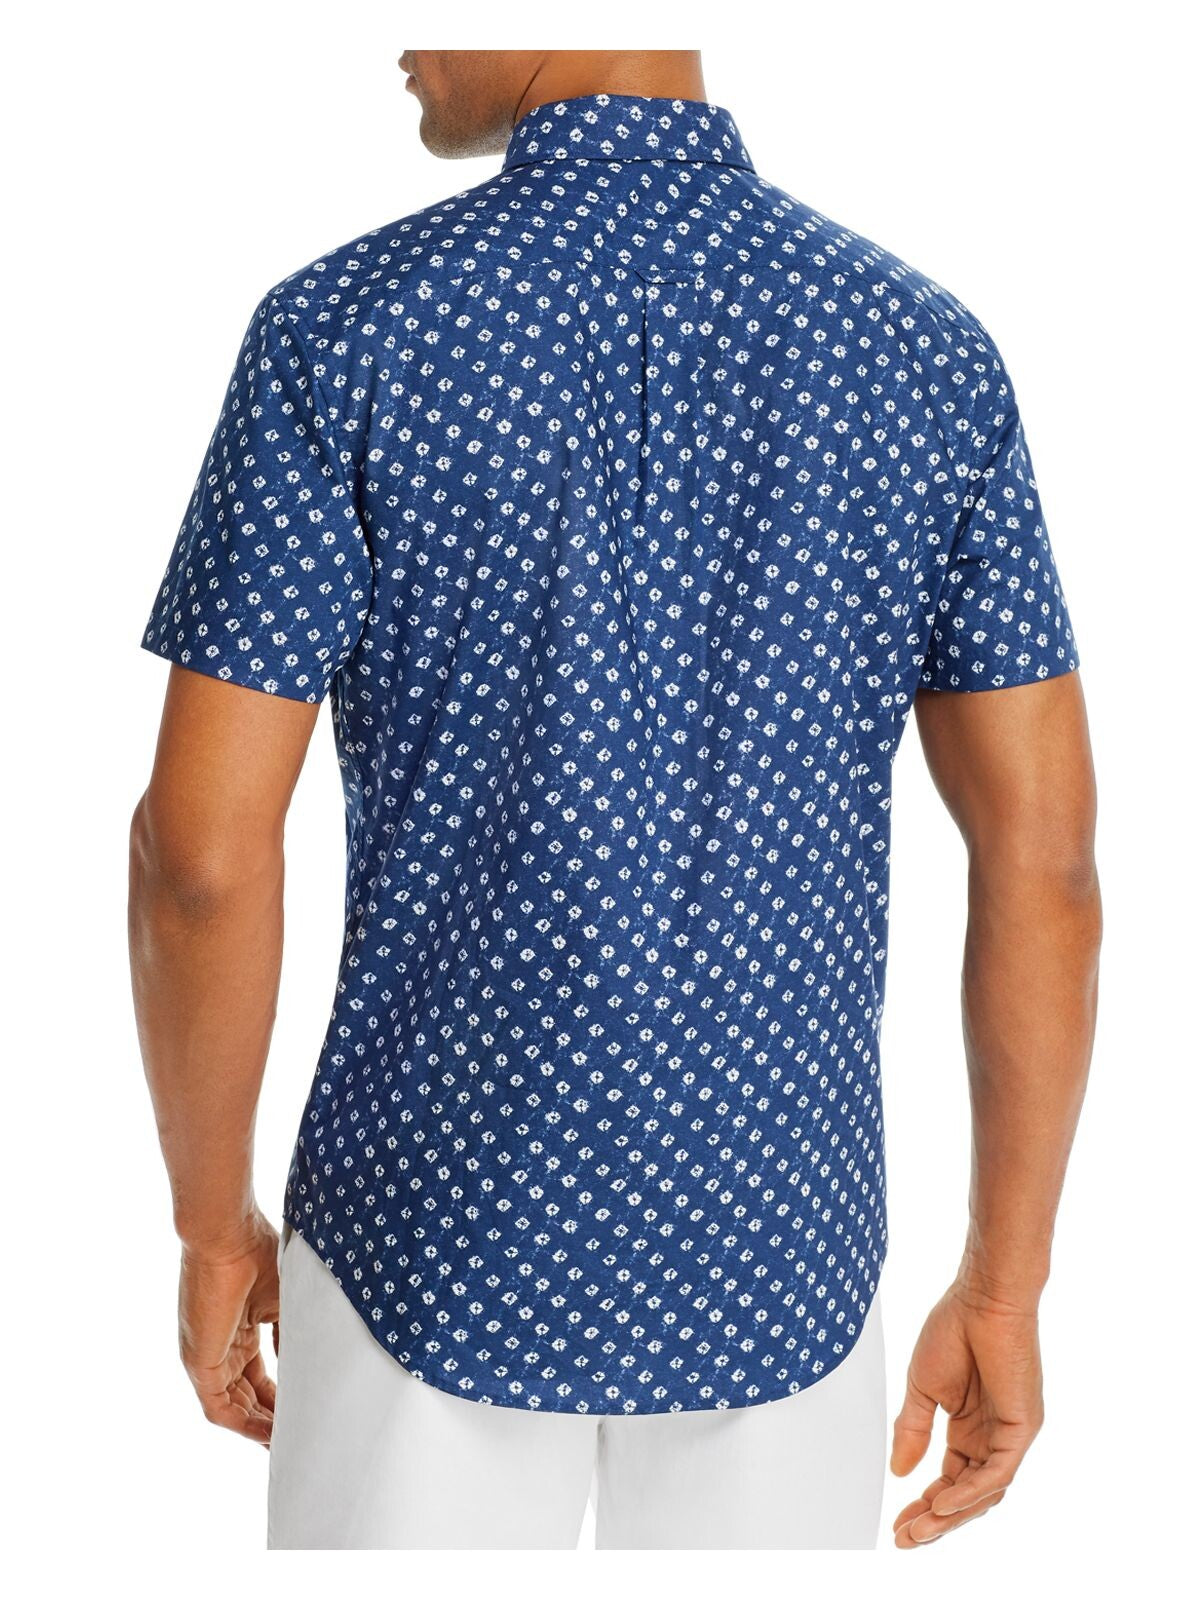 The Mens store Mens Blue Patterned Short Sleeve Classic Fit Button Down Casual Shirt XXL